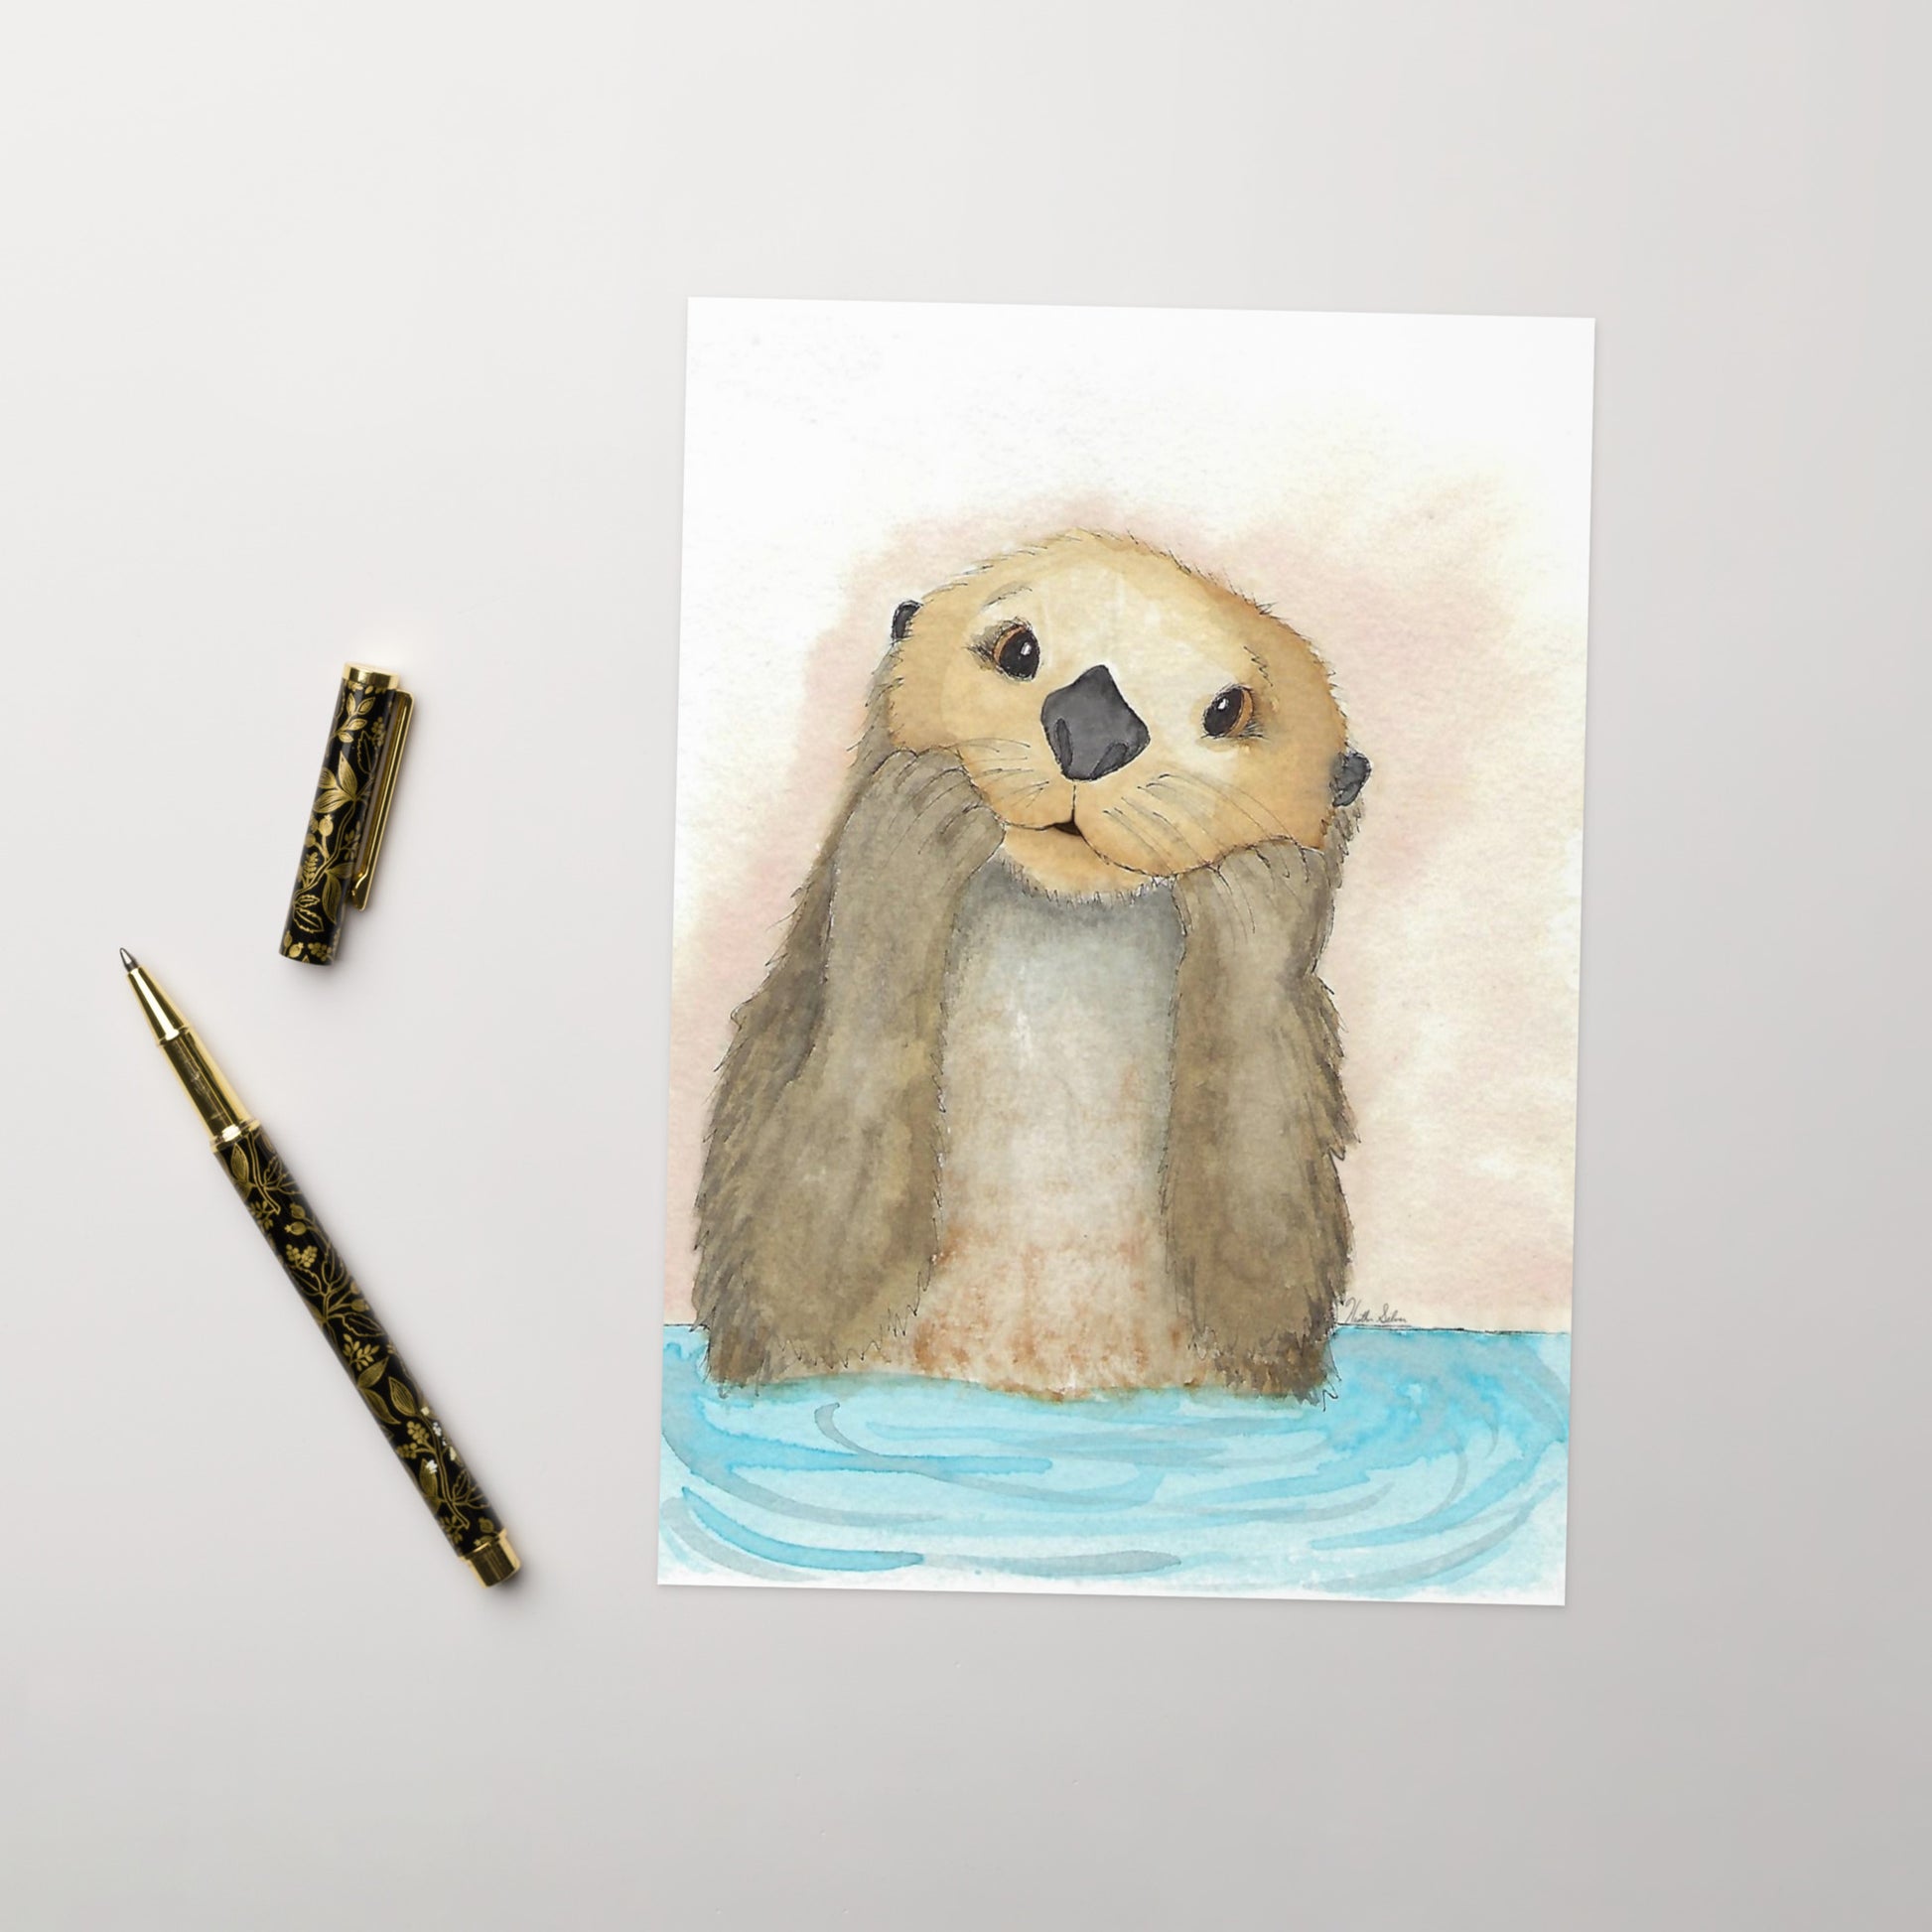 Pack of ten 5 x 7 inch greeting cards. Features watercolor print of a playful sea otter on the front. Inside is blank. Made of coated paperboard. Comes with ten envelopes. Shown on tabletop by ballpoint pen.